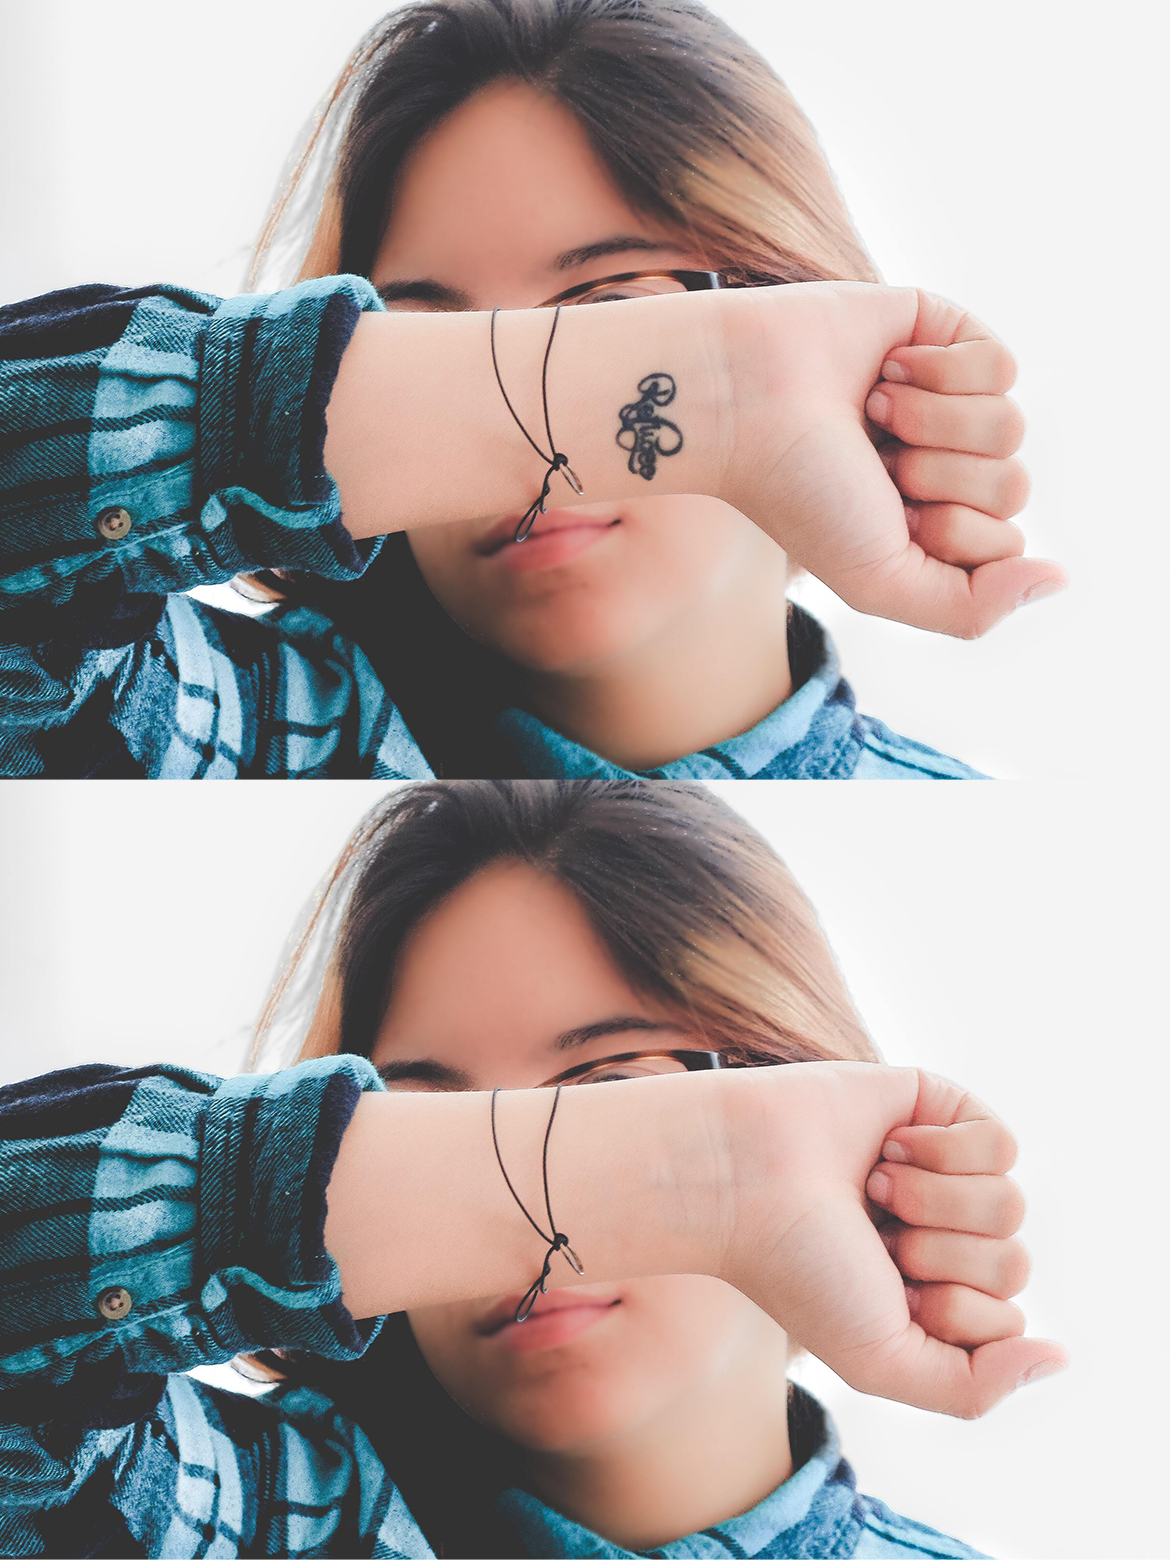 Covering Up Your Tattoo the Right Way — Tips for Coverup Tattoos